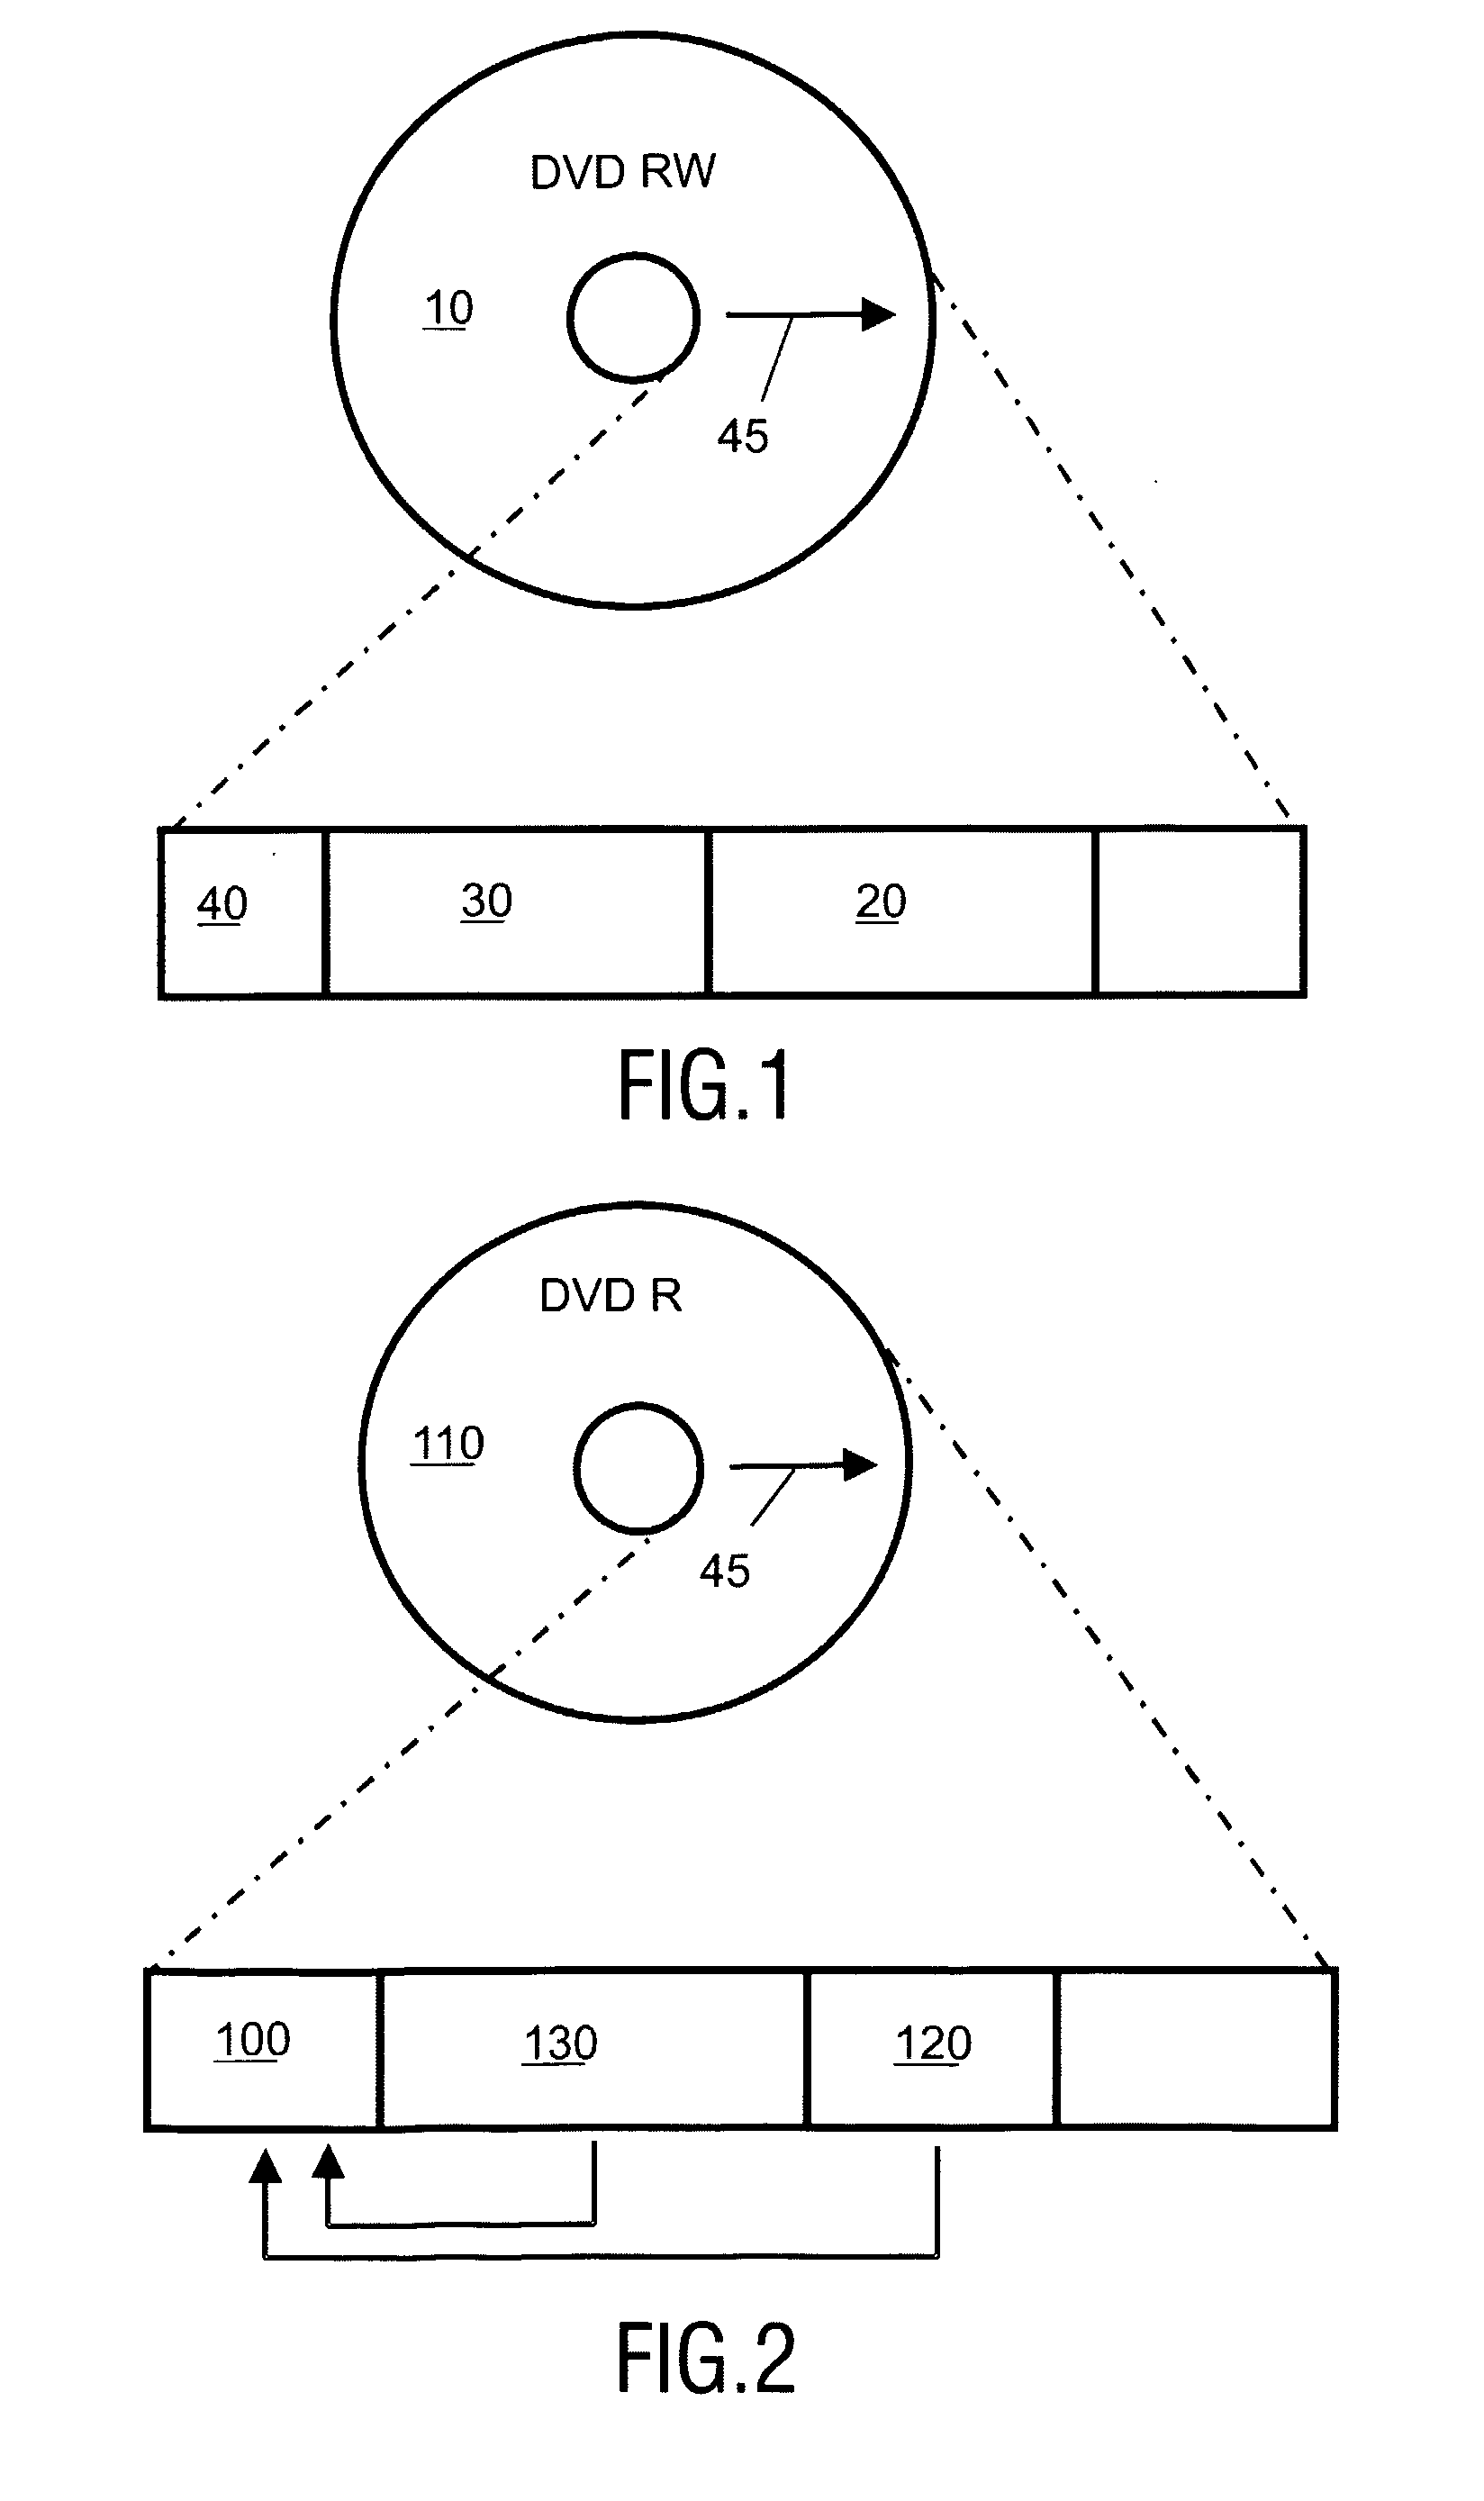 Method of Partitioning Data on Data Carriers